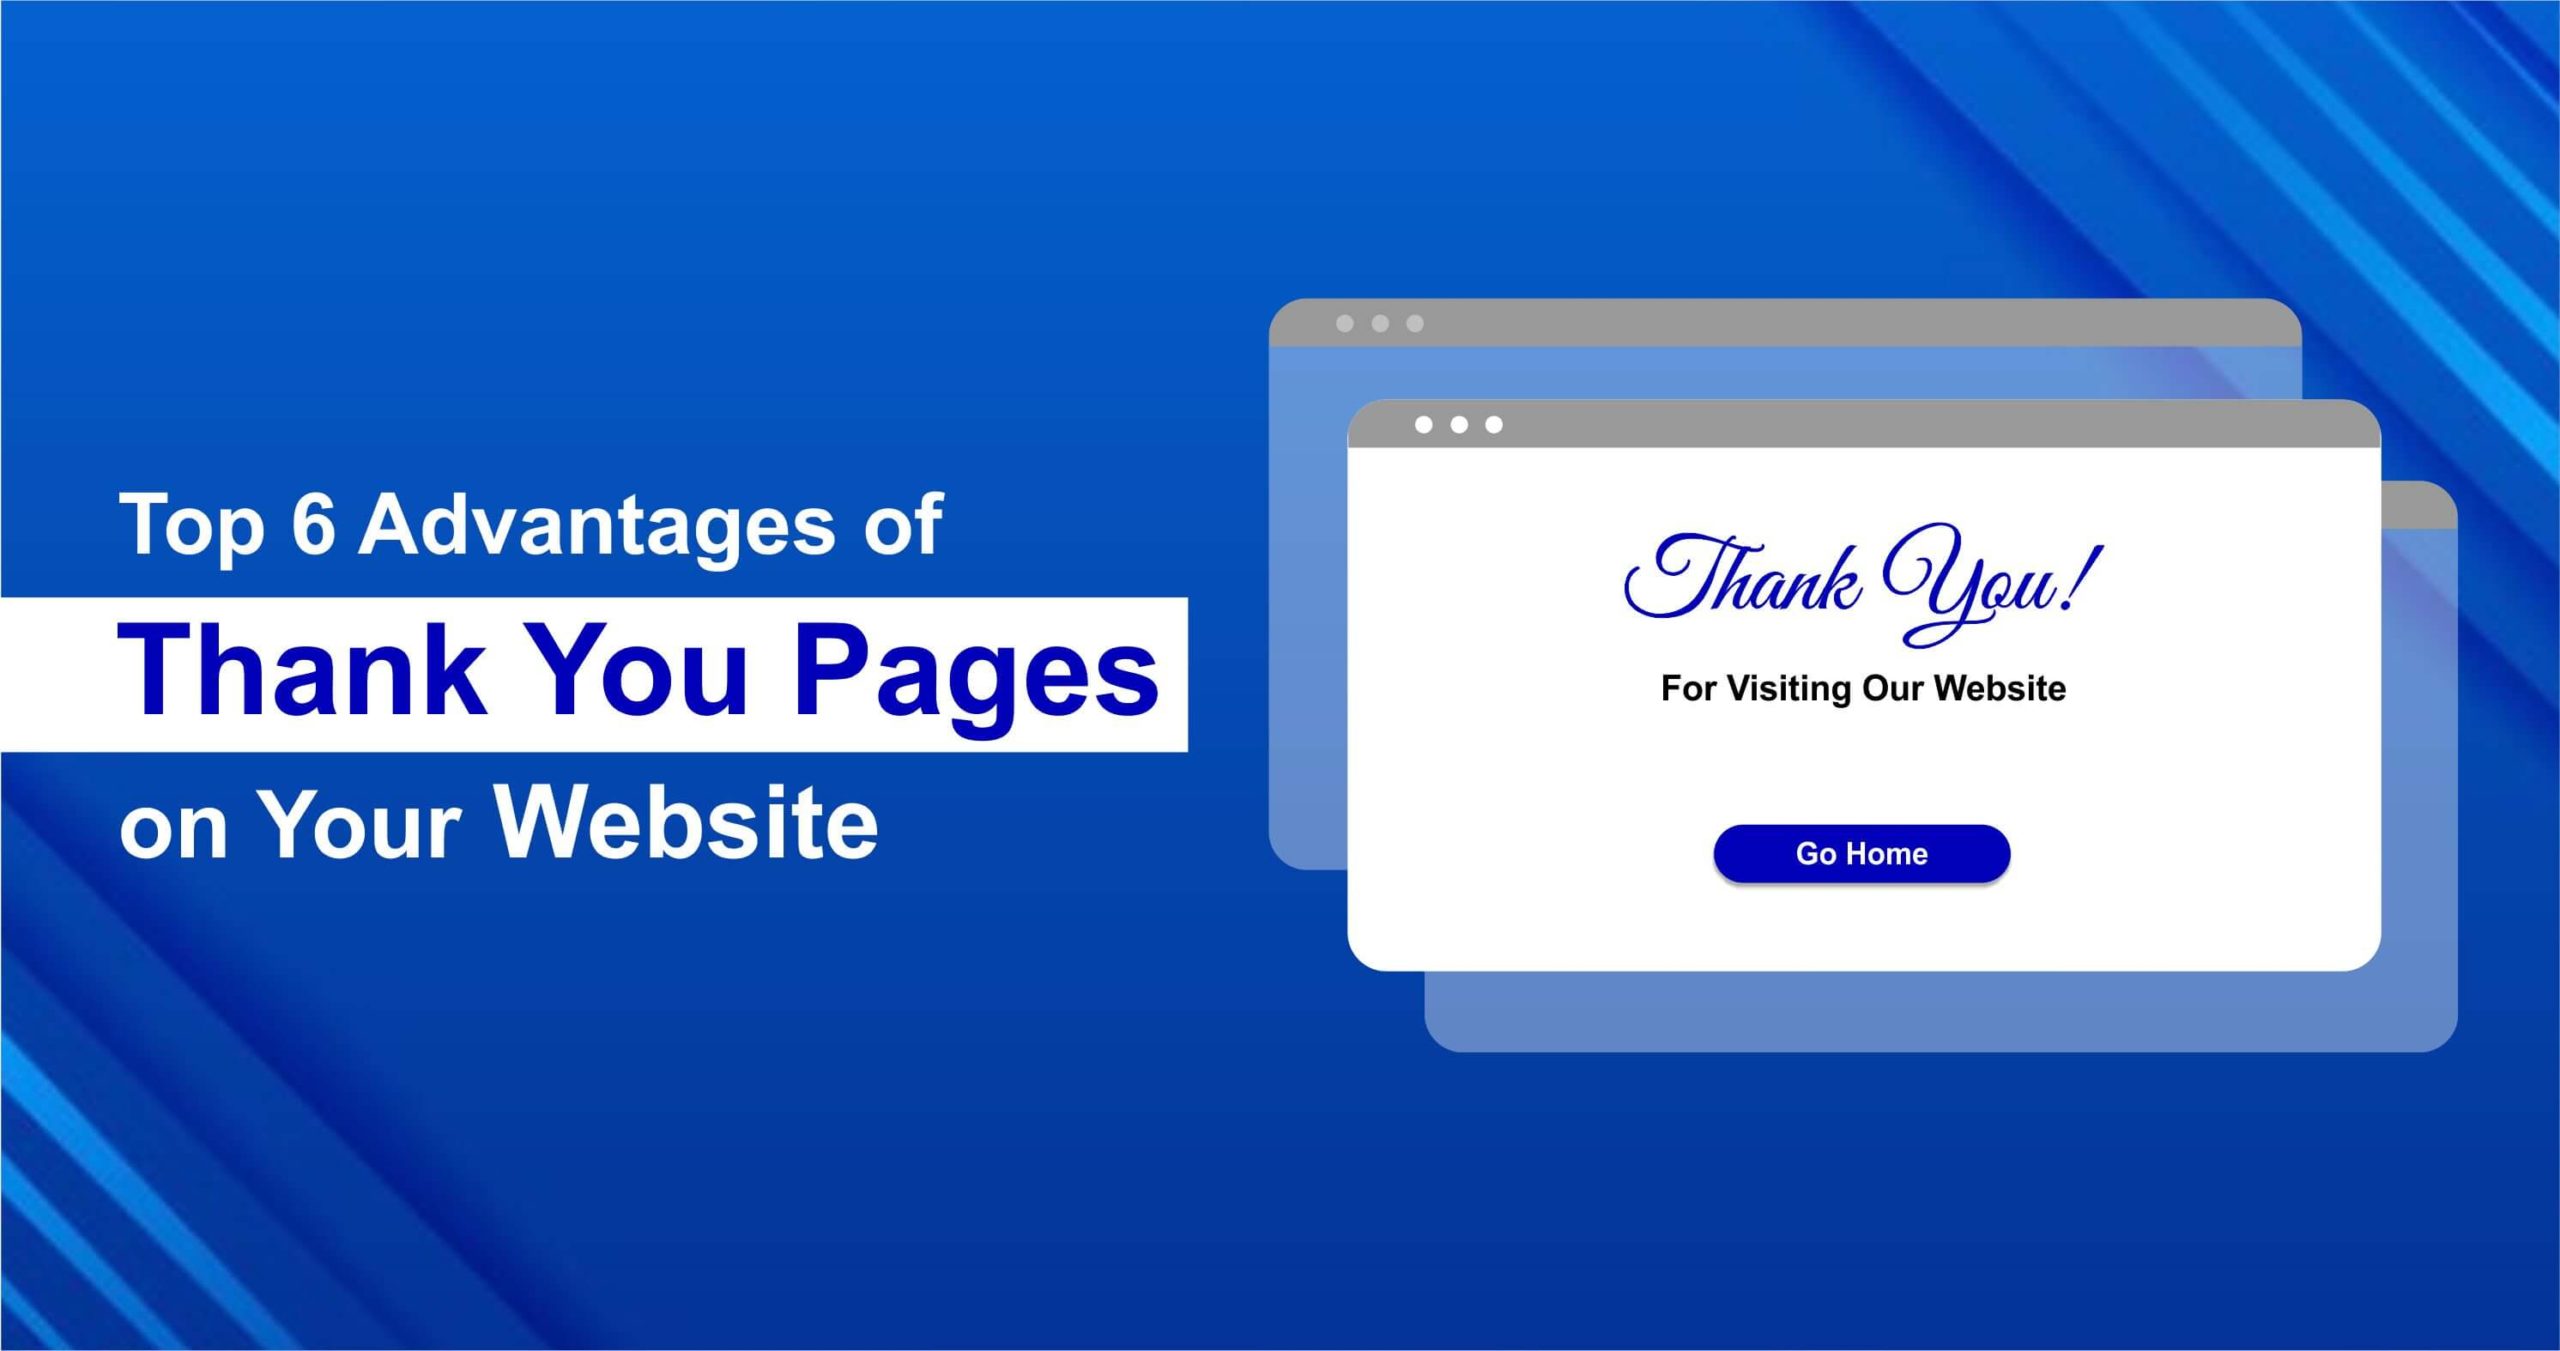 Top 6 Advantages of Thank You Pages on Your Website